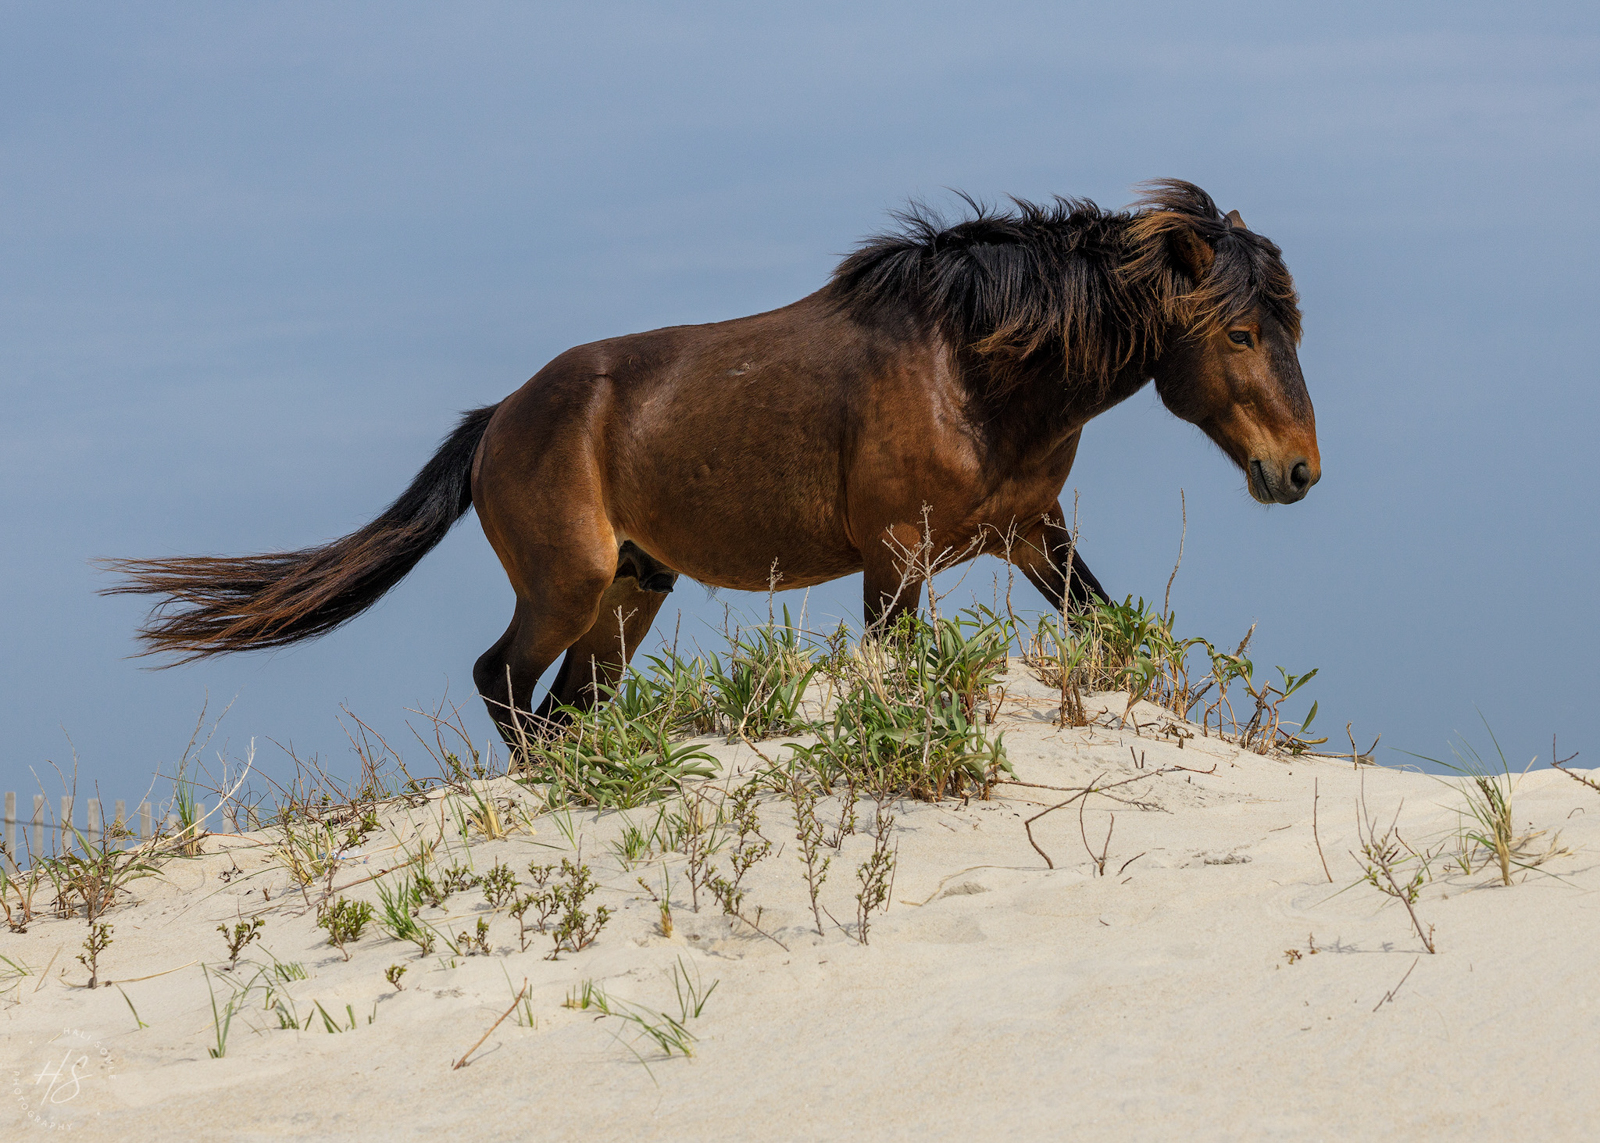 2021_05_Assateague-10288-Edit2048.jpg - One of the gorgeous stallions walking up through the dunes at the beach.